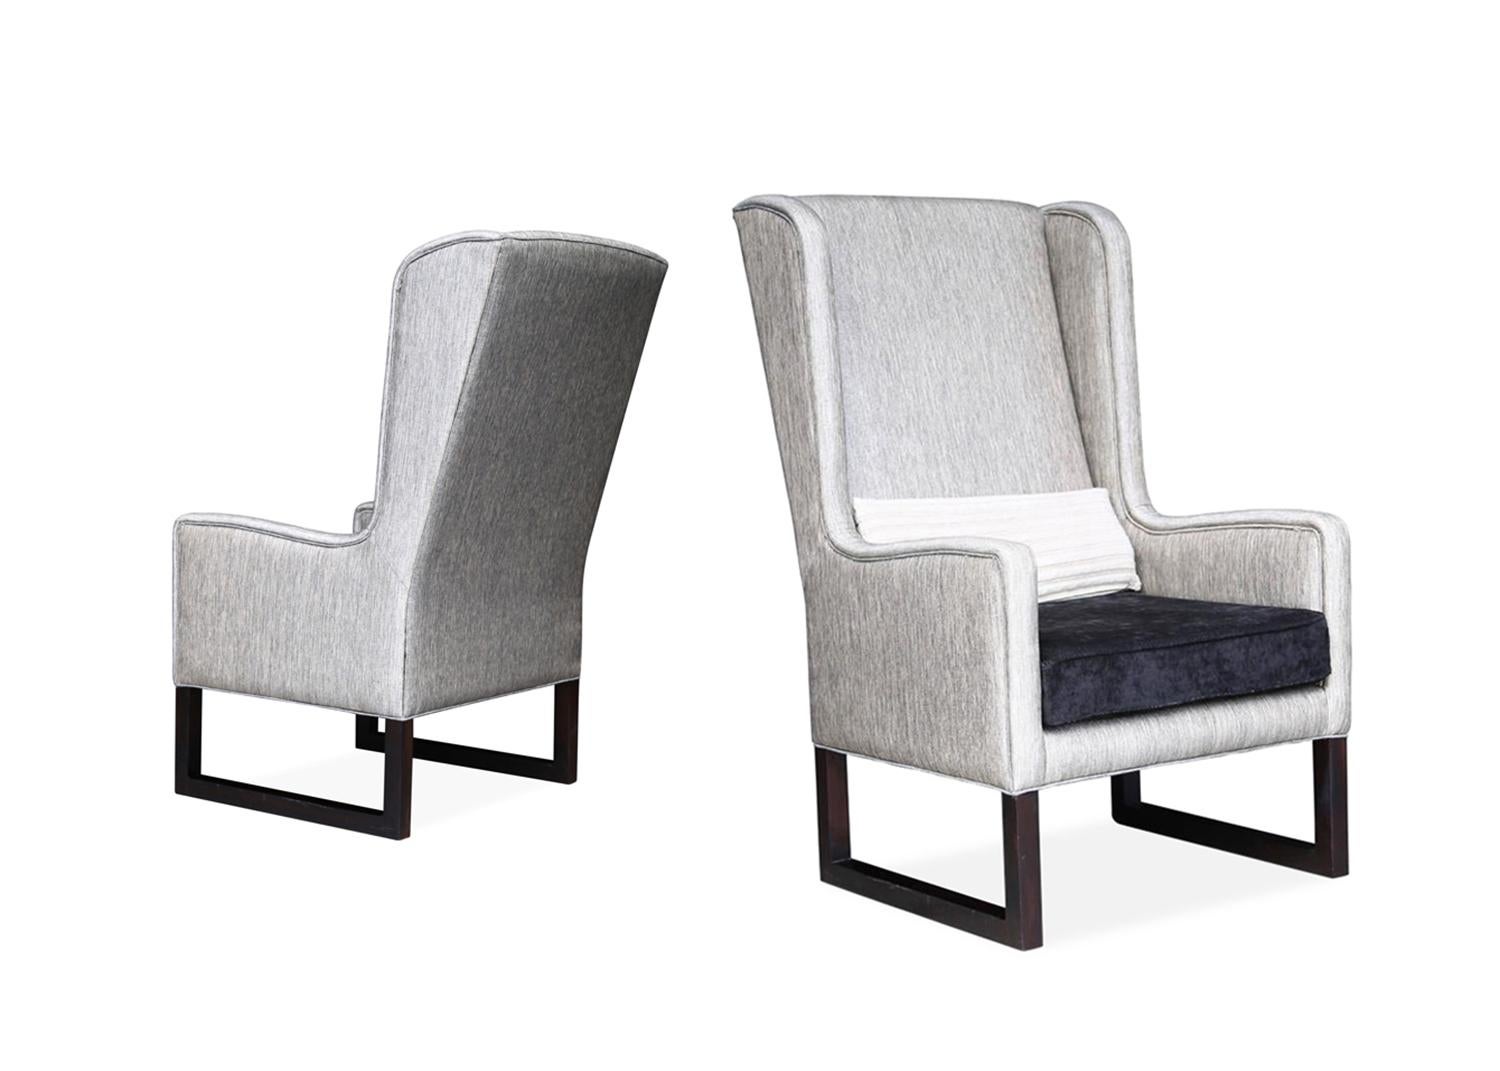 Costantini Lounge Chairs